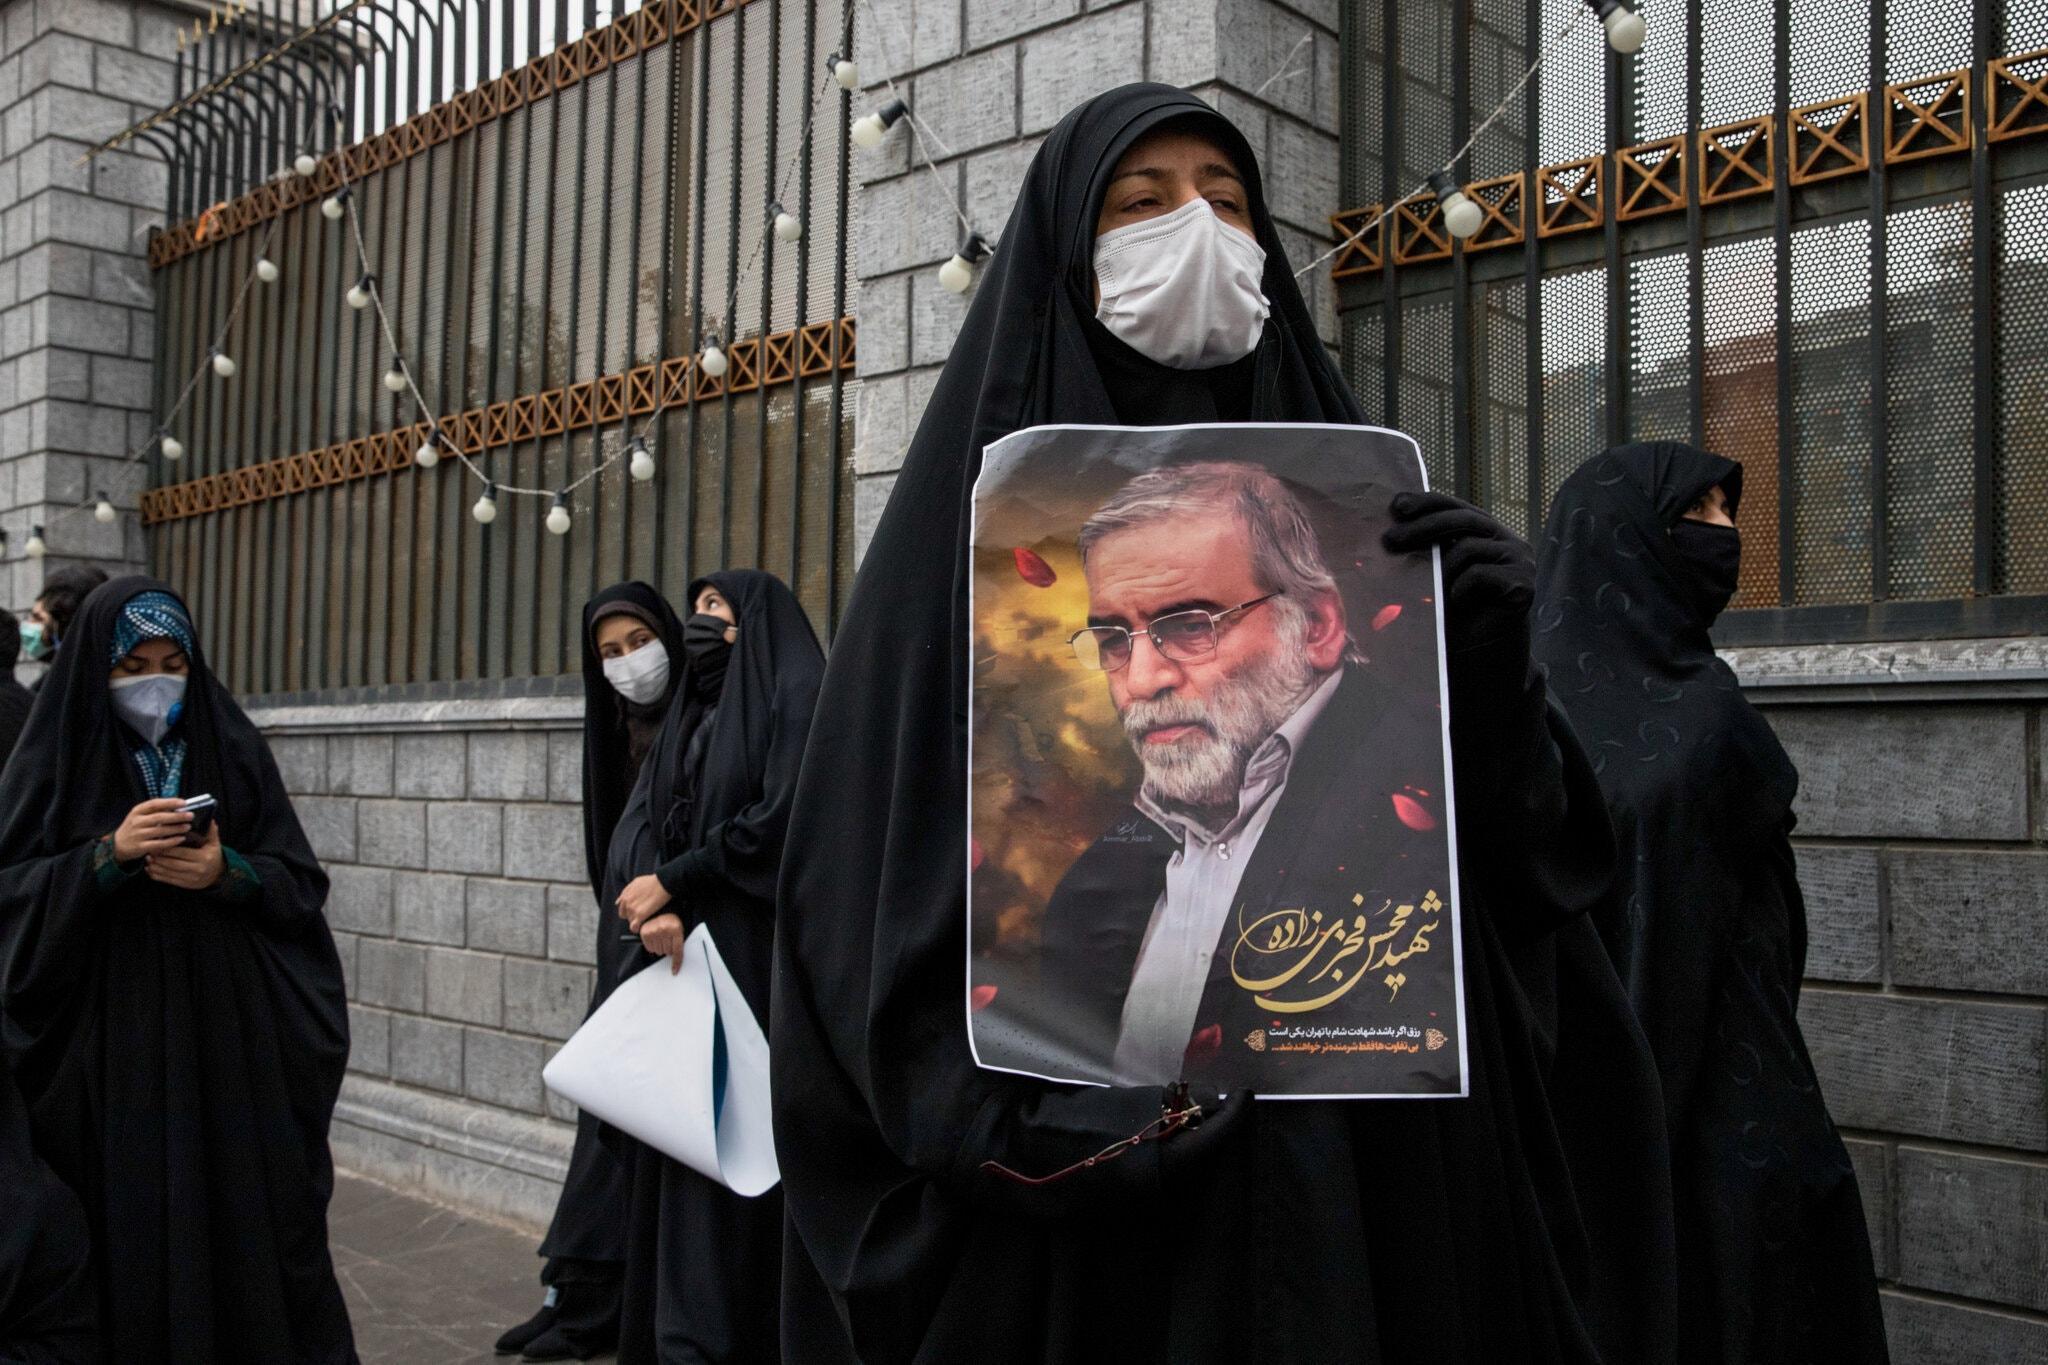 Mohsen Fakhrizadeh, the father of Iran’s nuclear program, kept a low profile and photographs of him were rare. This photo appeared on martyrdom posters after his death.Credit...Arash Khamooshi for The New York Times